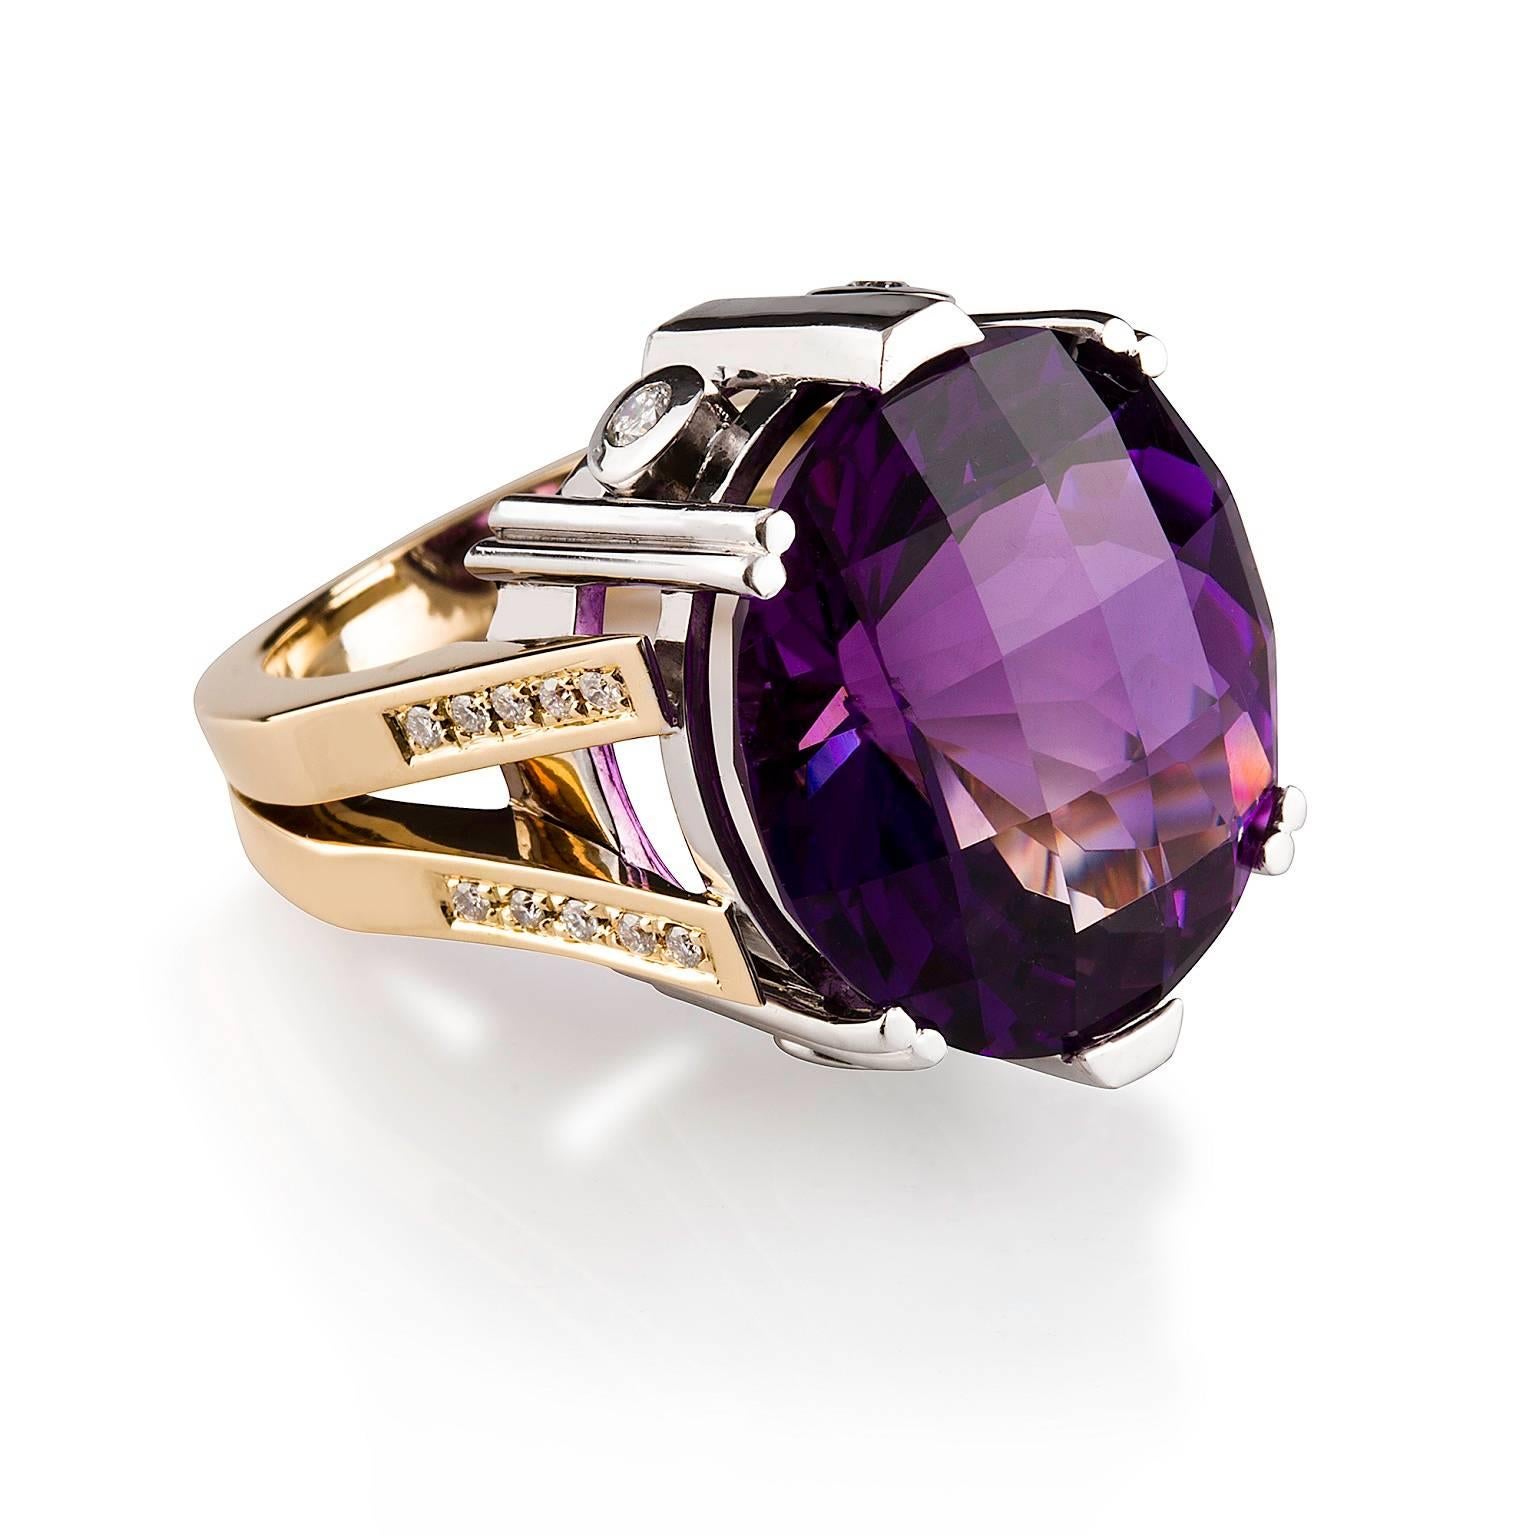 Viola Ring

Customization: A similar ring may be able to be made with your favourite gemstone and choice of precious metal. Contact us to discuss possibilities.

This stunning handmade dress ring consists of a large attractive oval amethyst that is